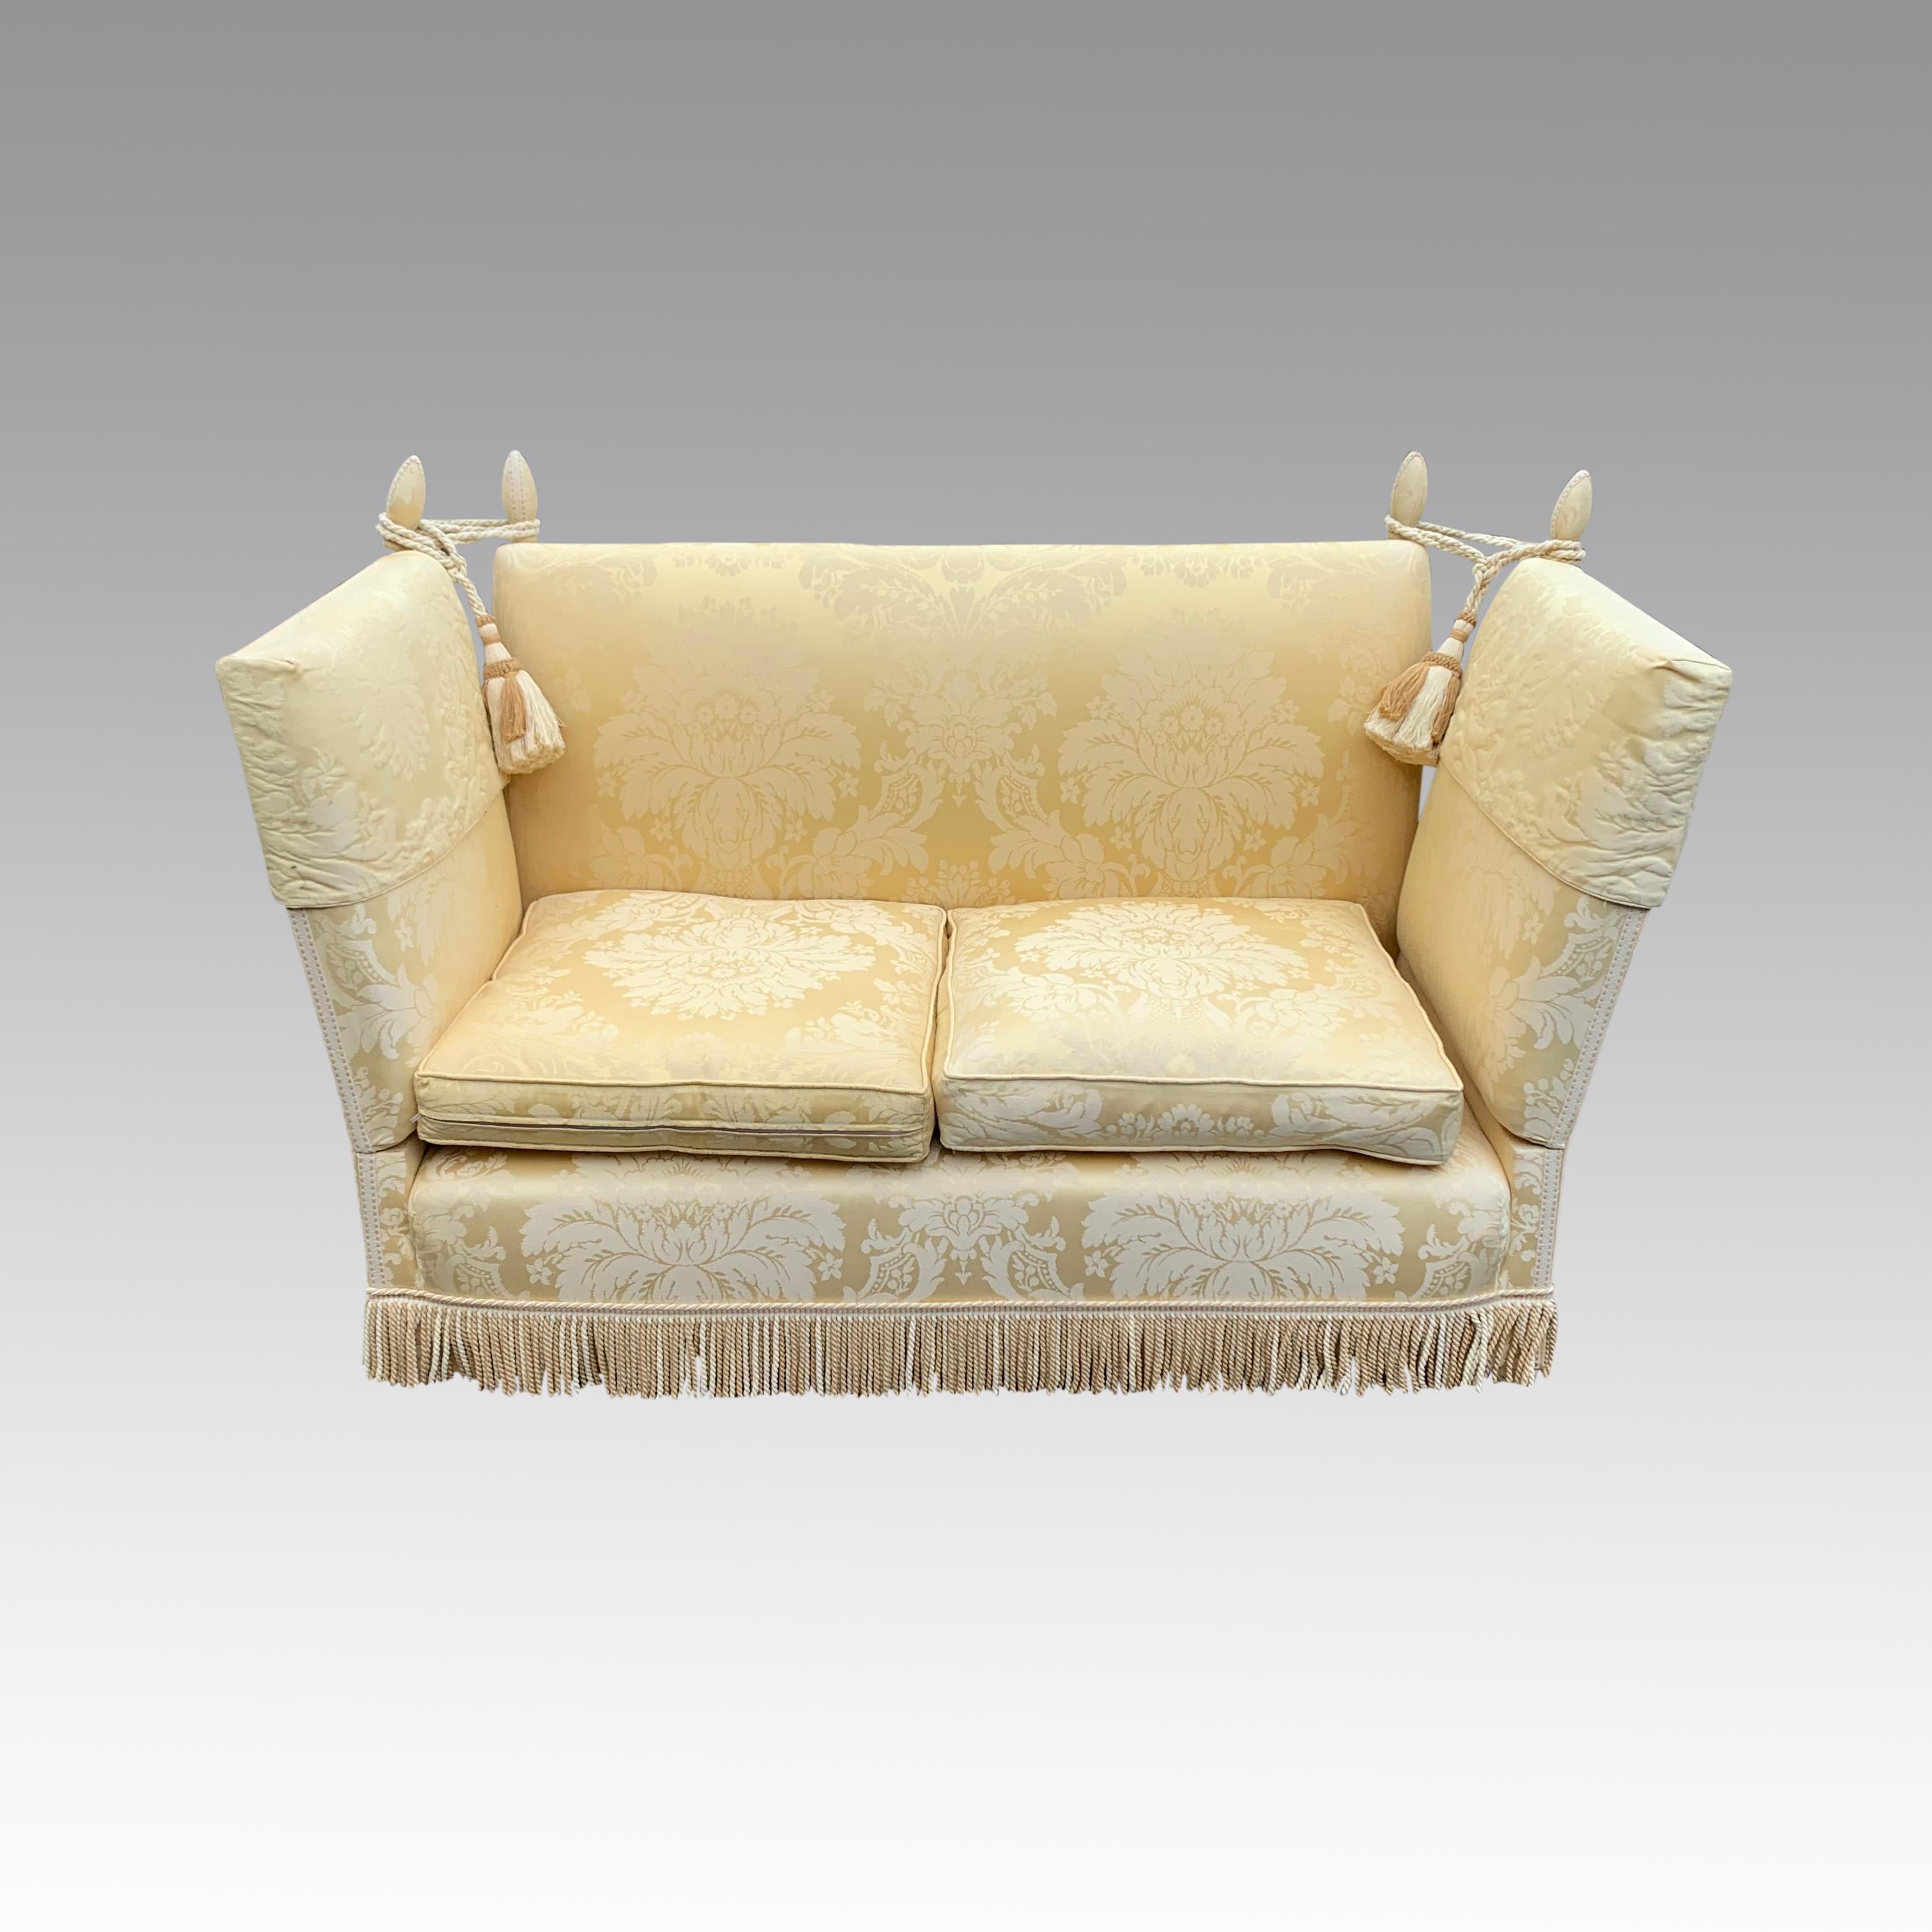 A beutiful early 20th century Knole Settee with drop ends in the traditional style, handmade with fully jointed original wooden frame. Upholstered some 8 years ago in a high quality gold coloured damask but in excellent condion with little or no